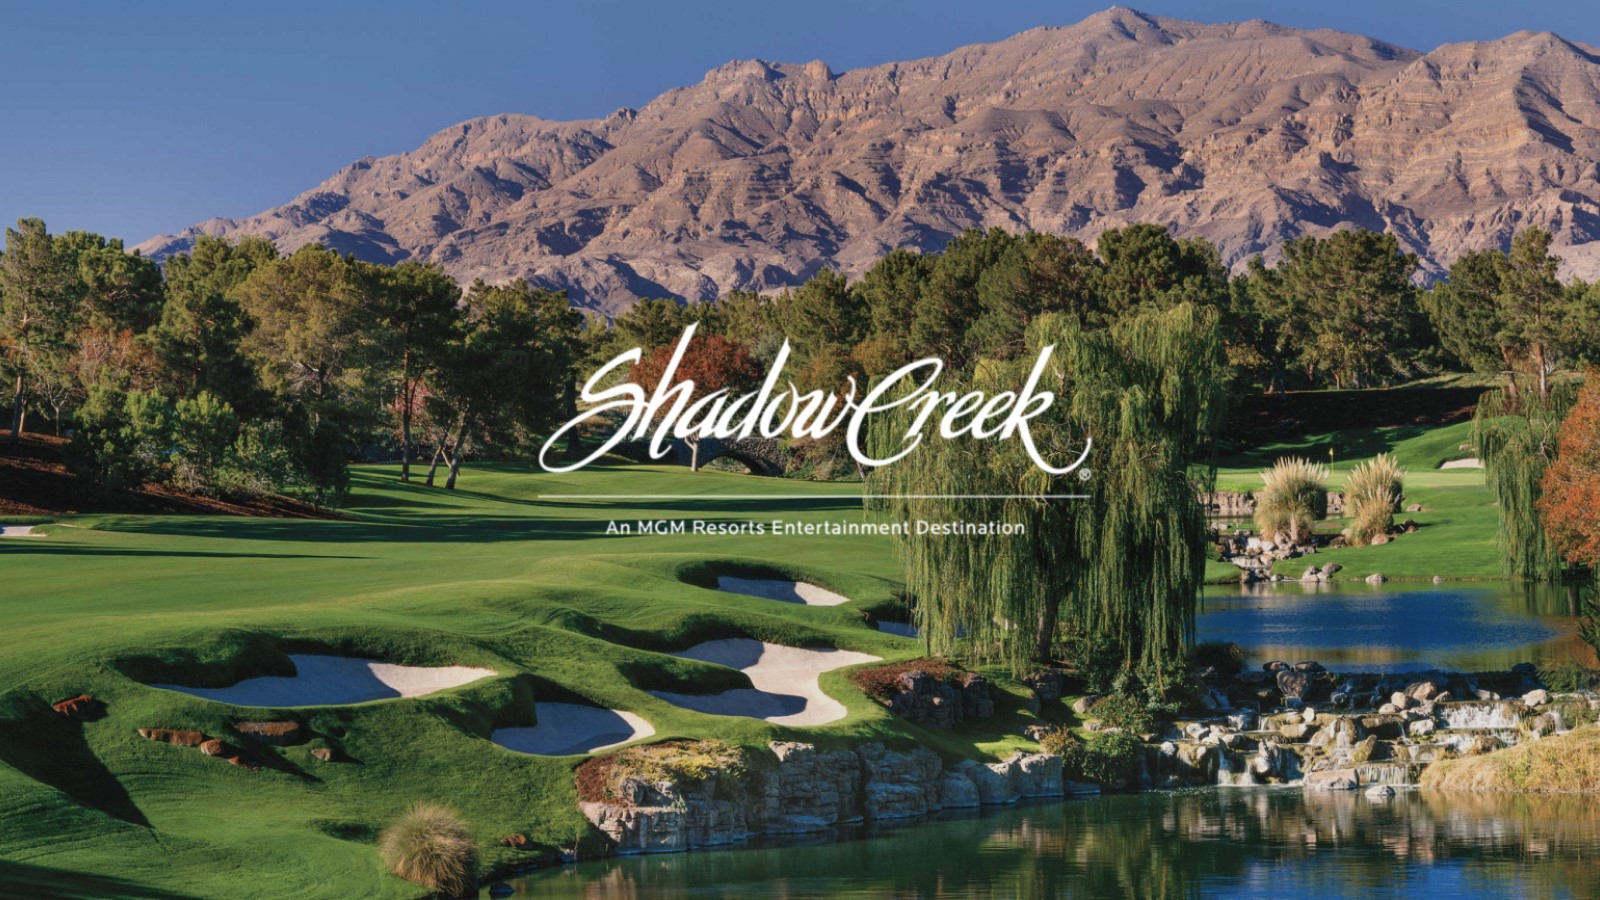 2020 CJ Cup How to Watch the Shadow Creek Event Online